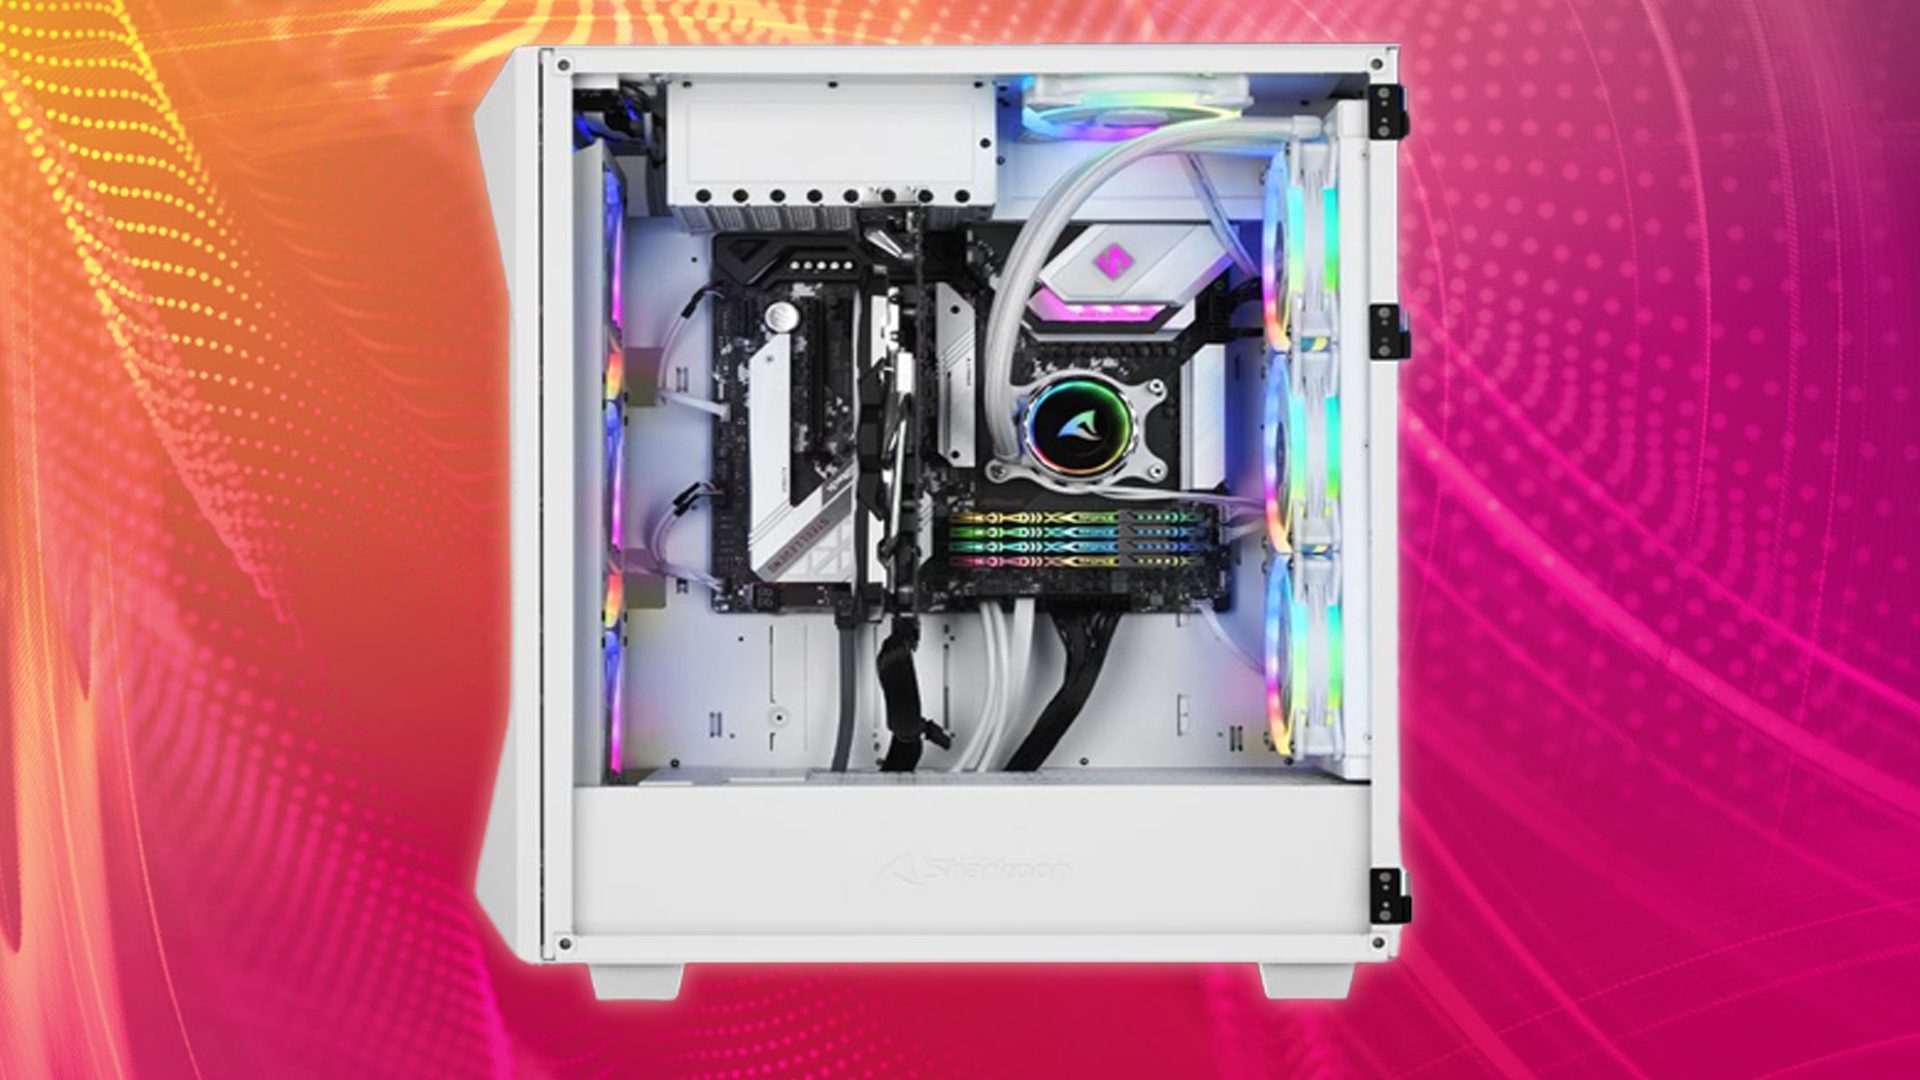 Lian Li Debuts Cases With Glass on Many Sides, Case Fan with